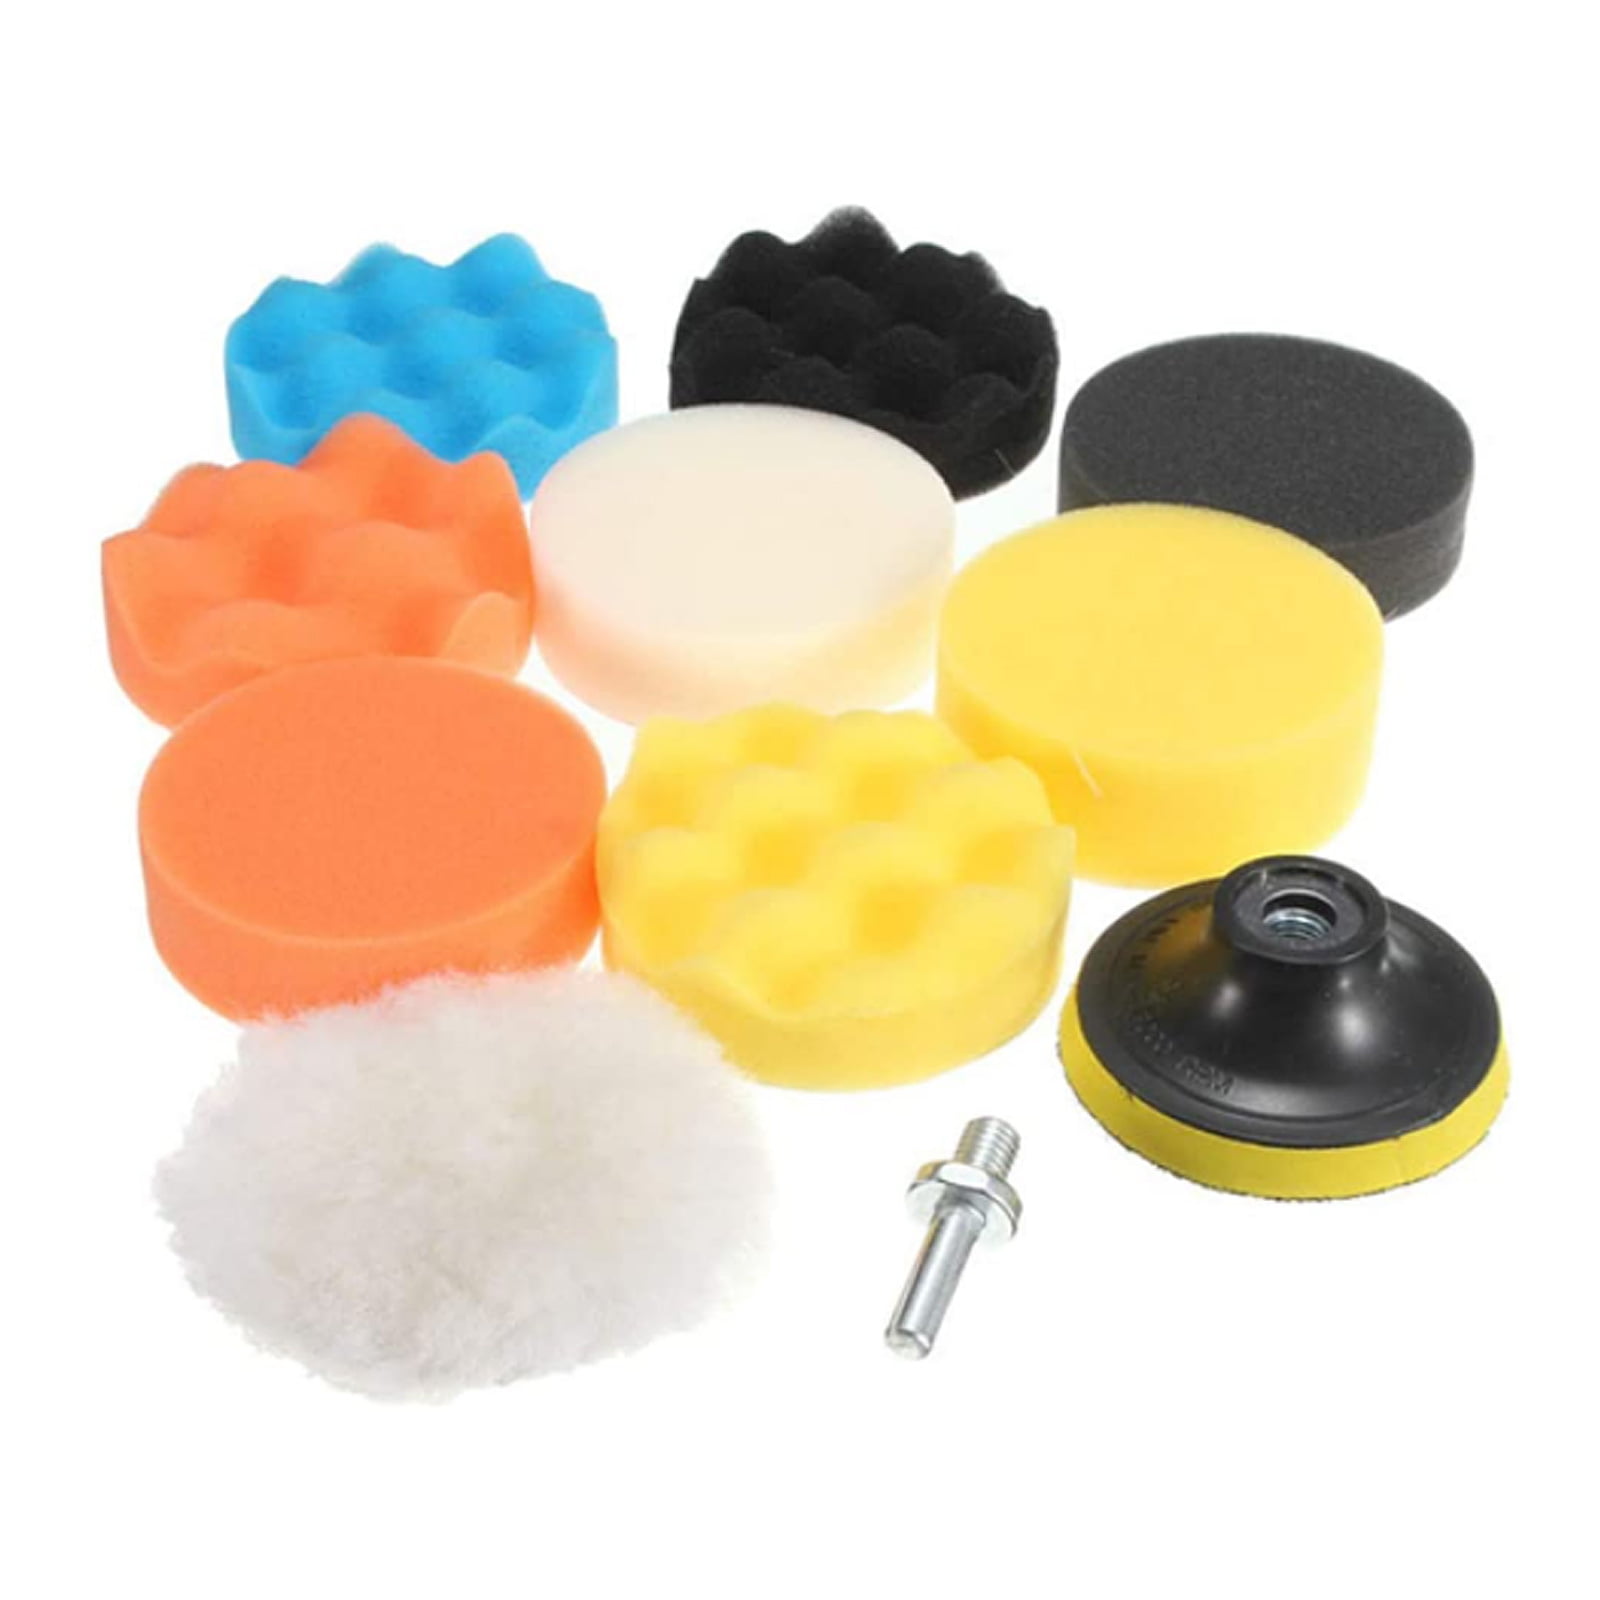 10pcs 3 Inch 80mm Buffing Pad Polishing Pad Kit For Car Polisher with M14 Thread 